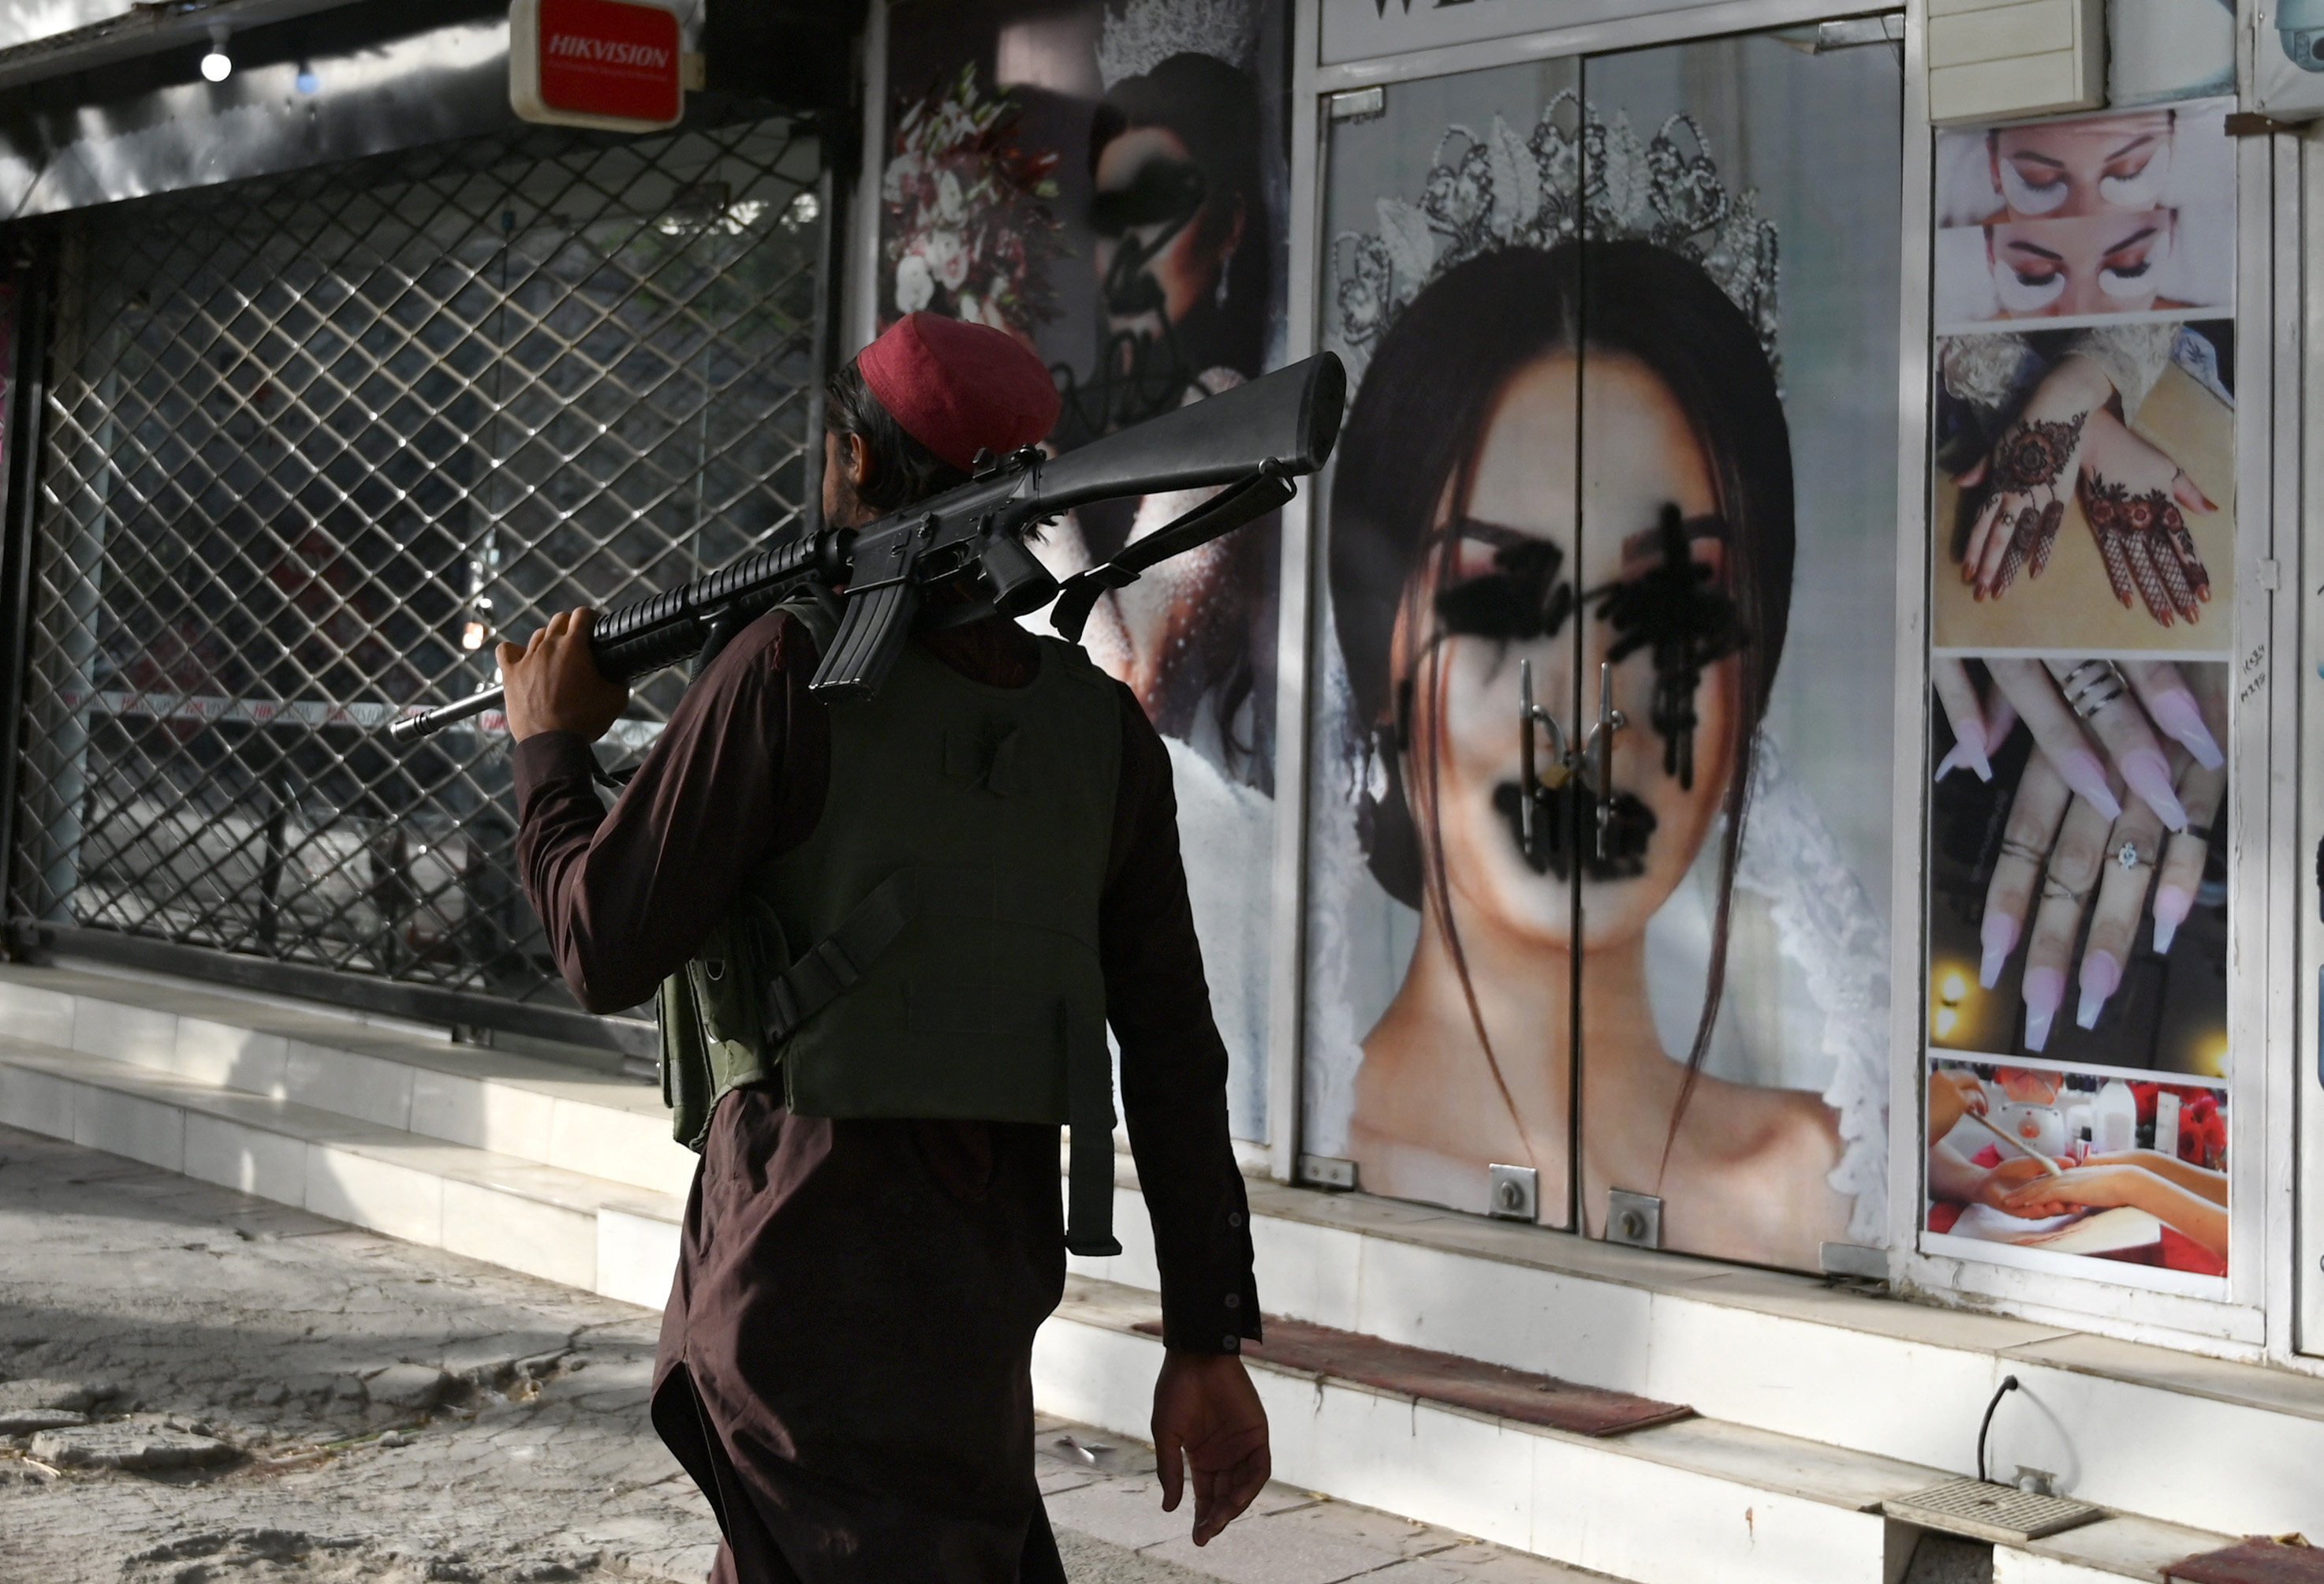 A Taliban fighter walks past a beauty salon with images of women defaced using spray paint in Shar-e-Naw, in Kabul, Afghanistan, on August 18. Photo: AFP